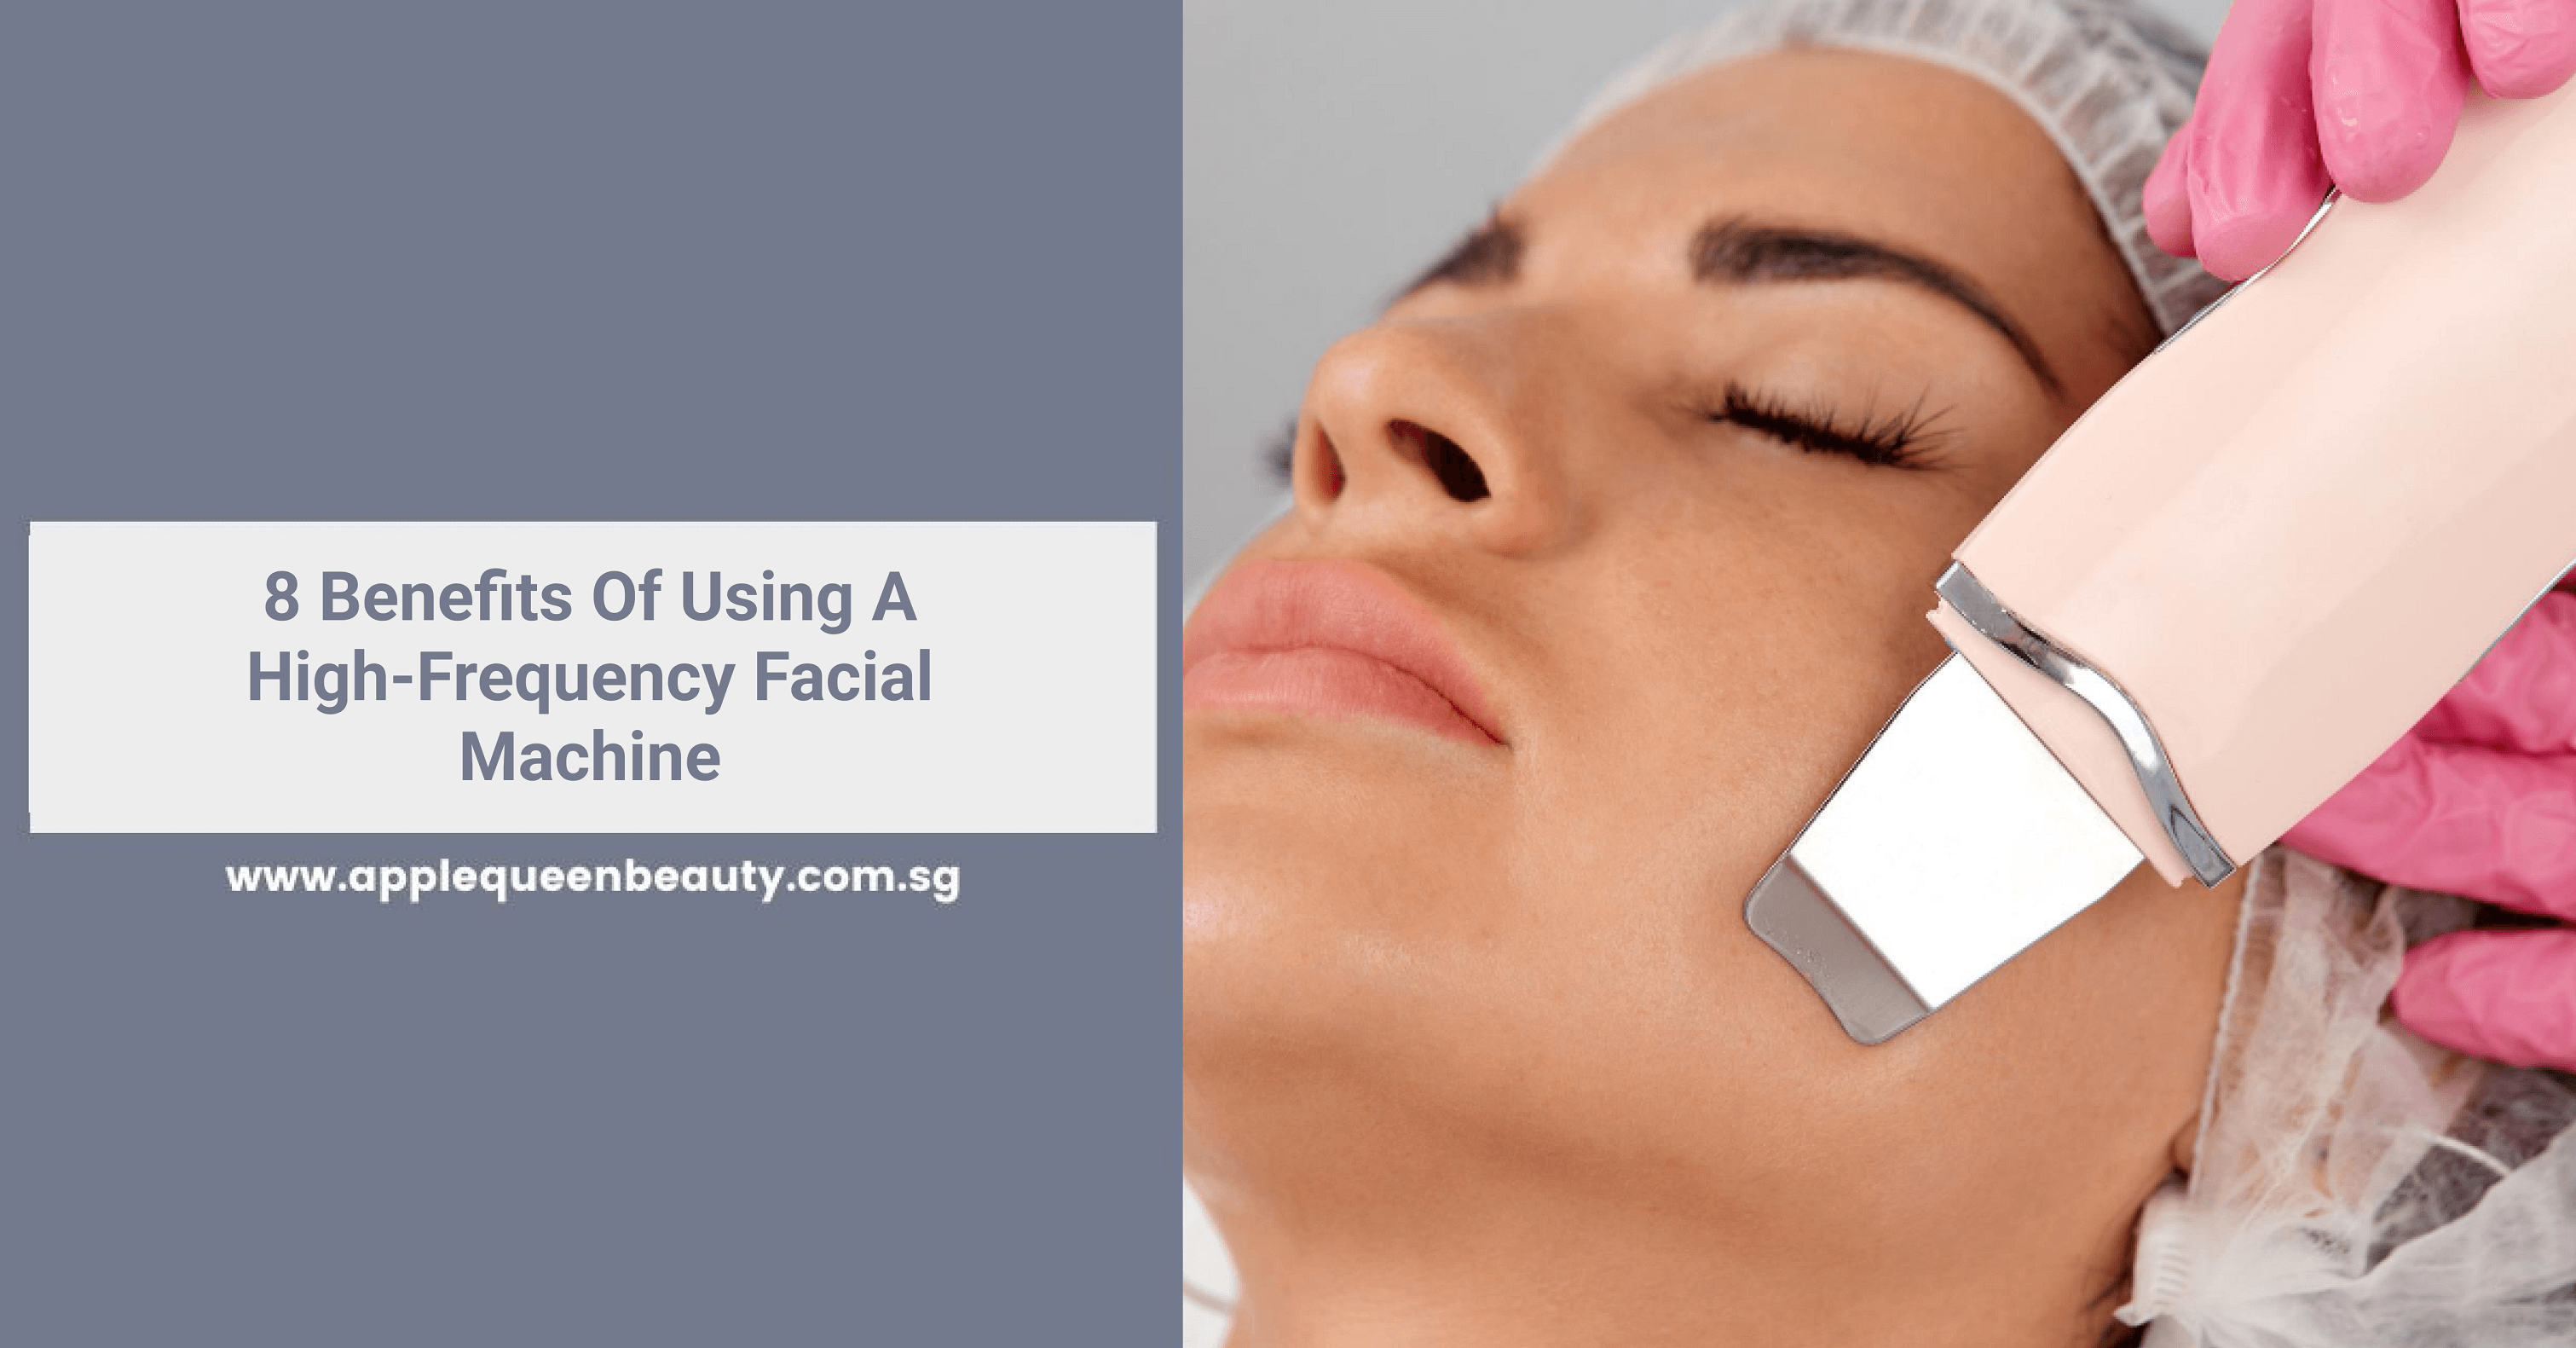 Benefits Of Using A High-Frequency Facial Machine